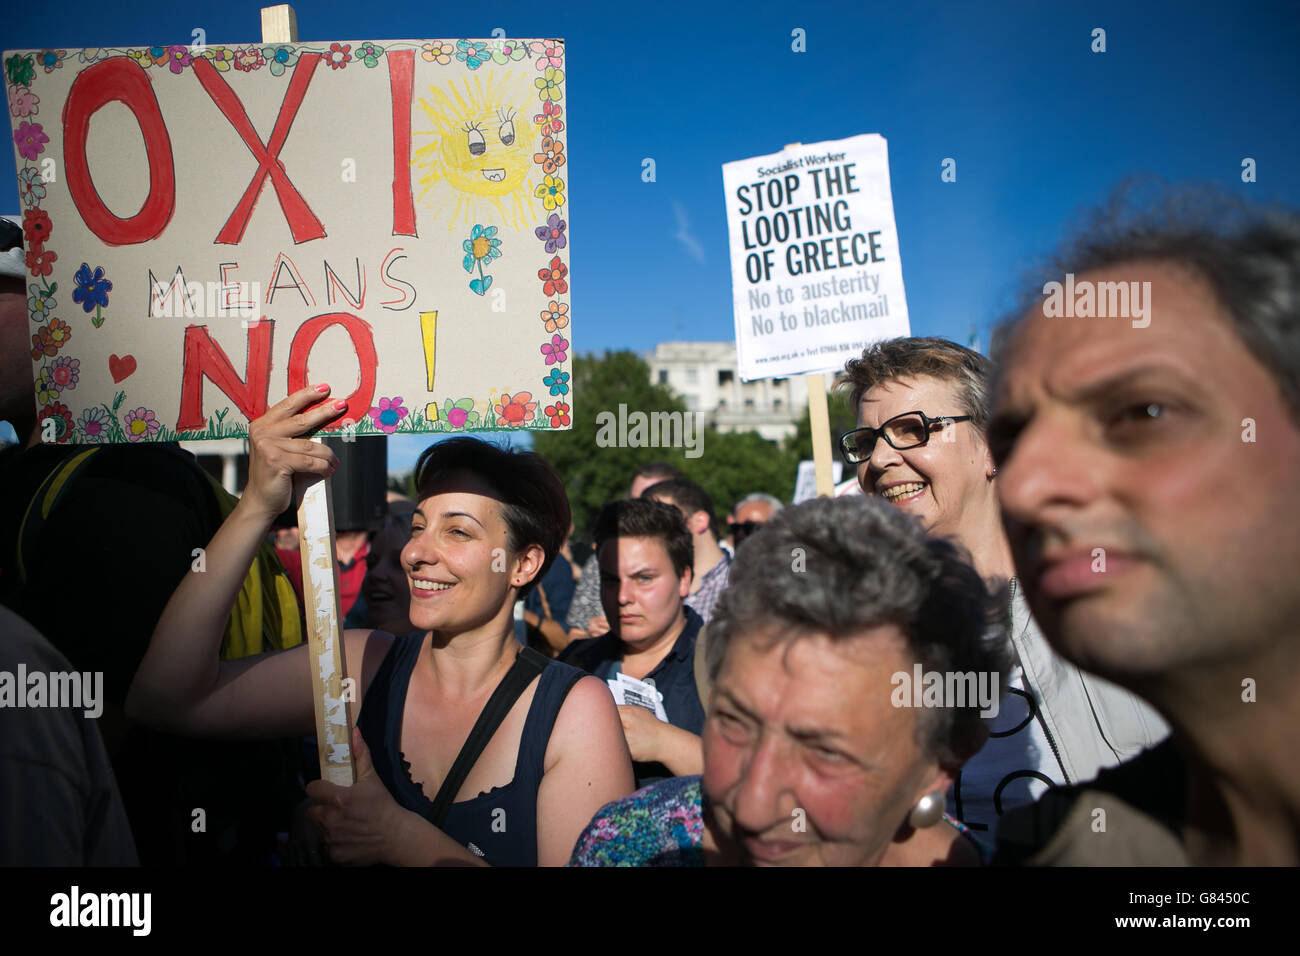 Demonstrators holding placards take part in a protest against the European Central Bank, in Trafalgar Square, London, over Greece's debt repayments. Stock Photo